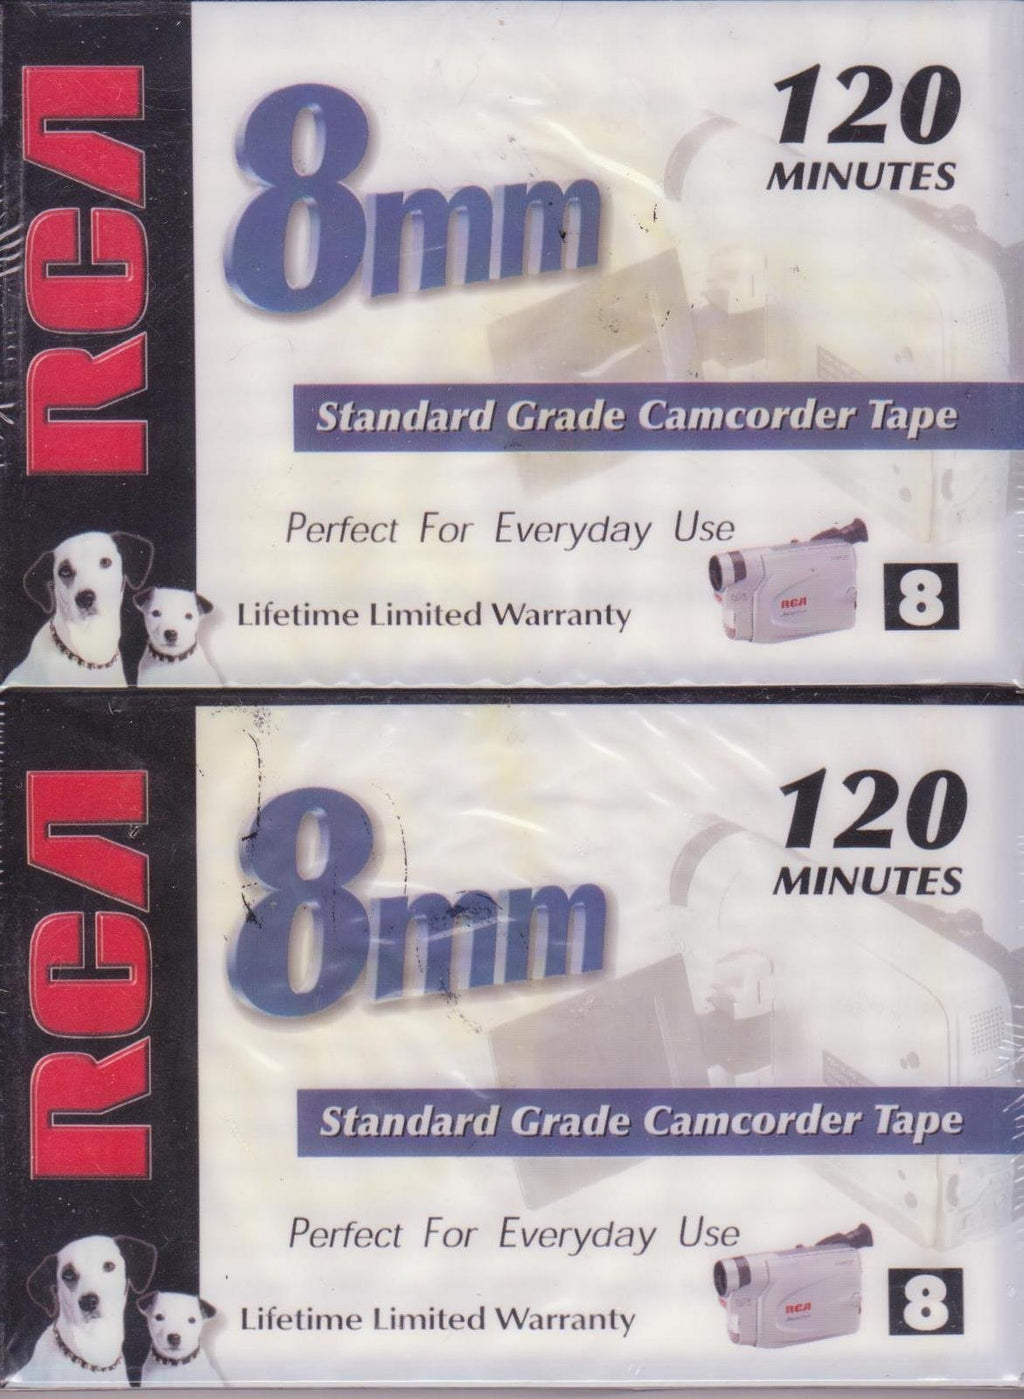 RCA 8mm Standard Grade Camcorder Tape 120 Minutes 2 Pack P6120PK2 by RCA